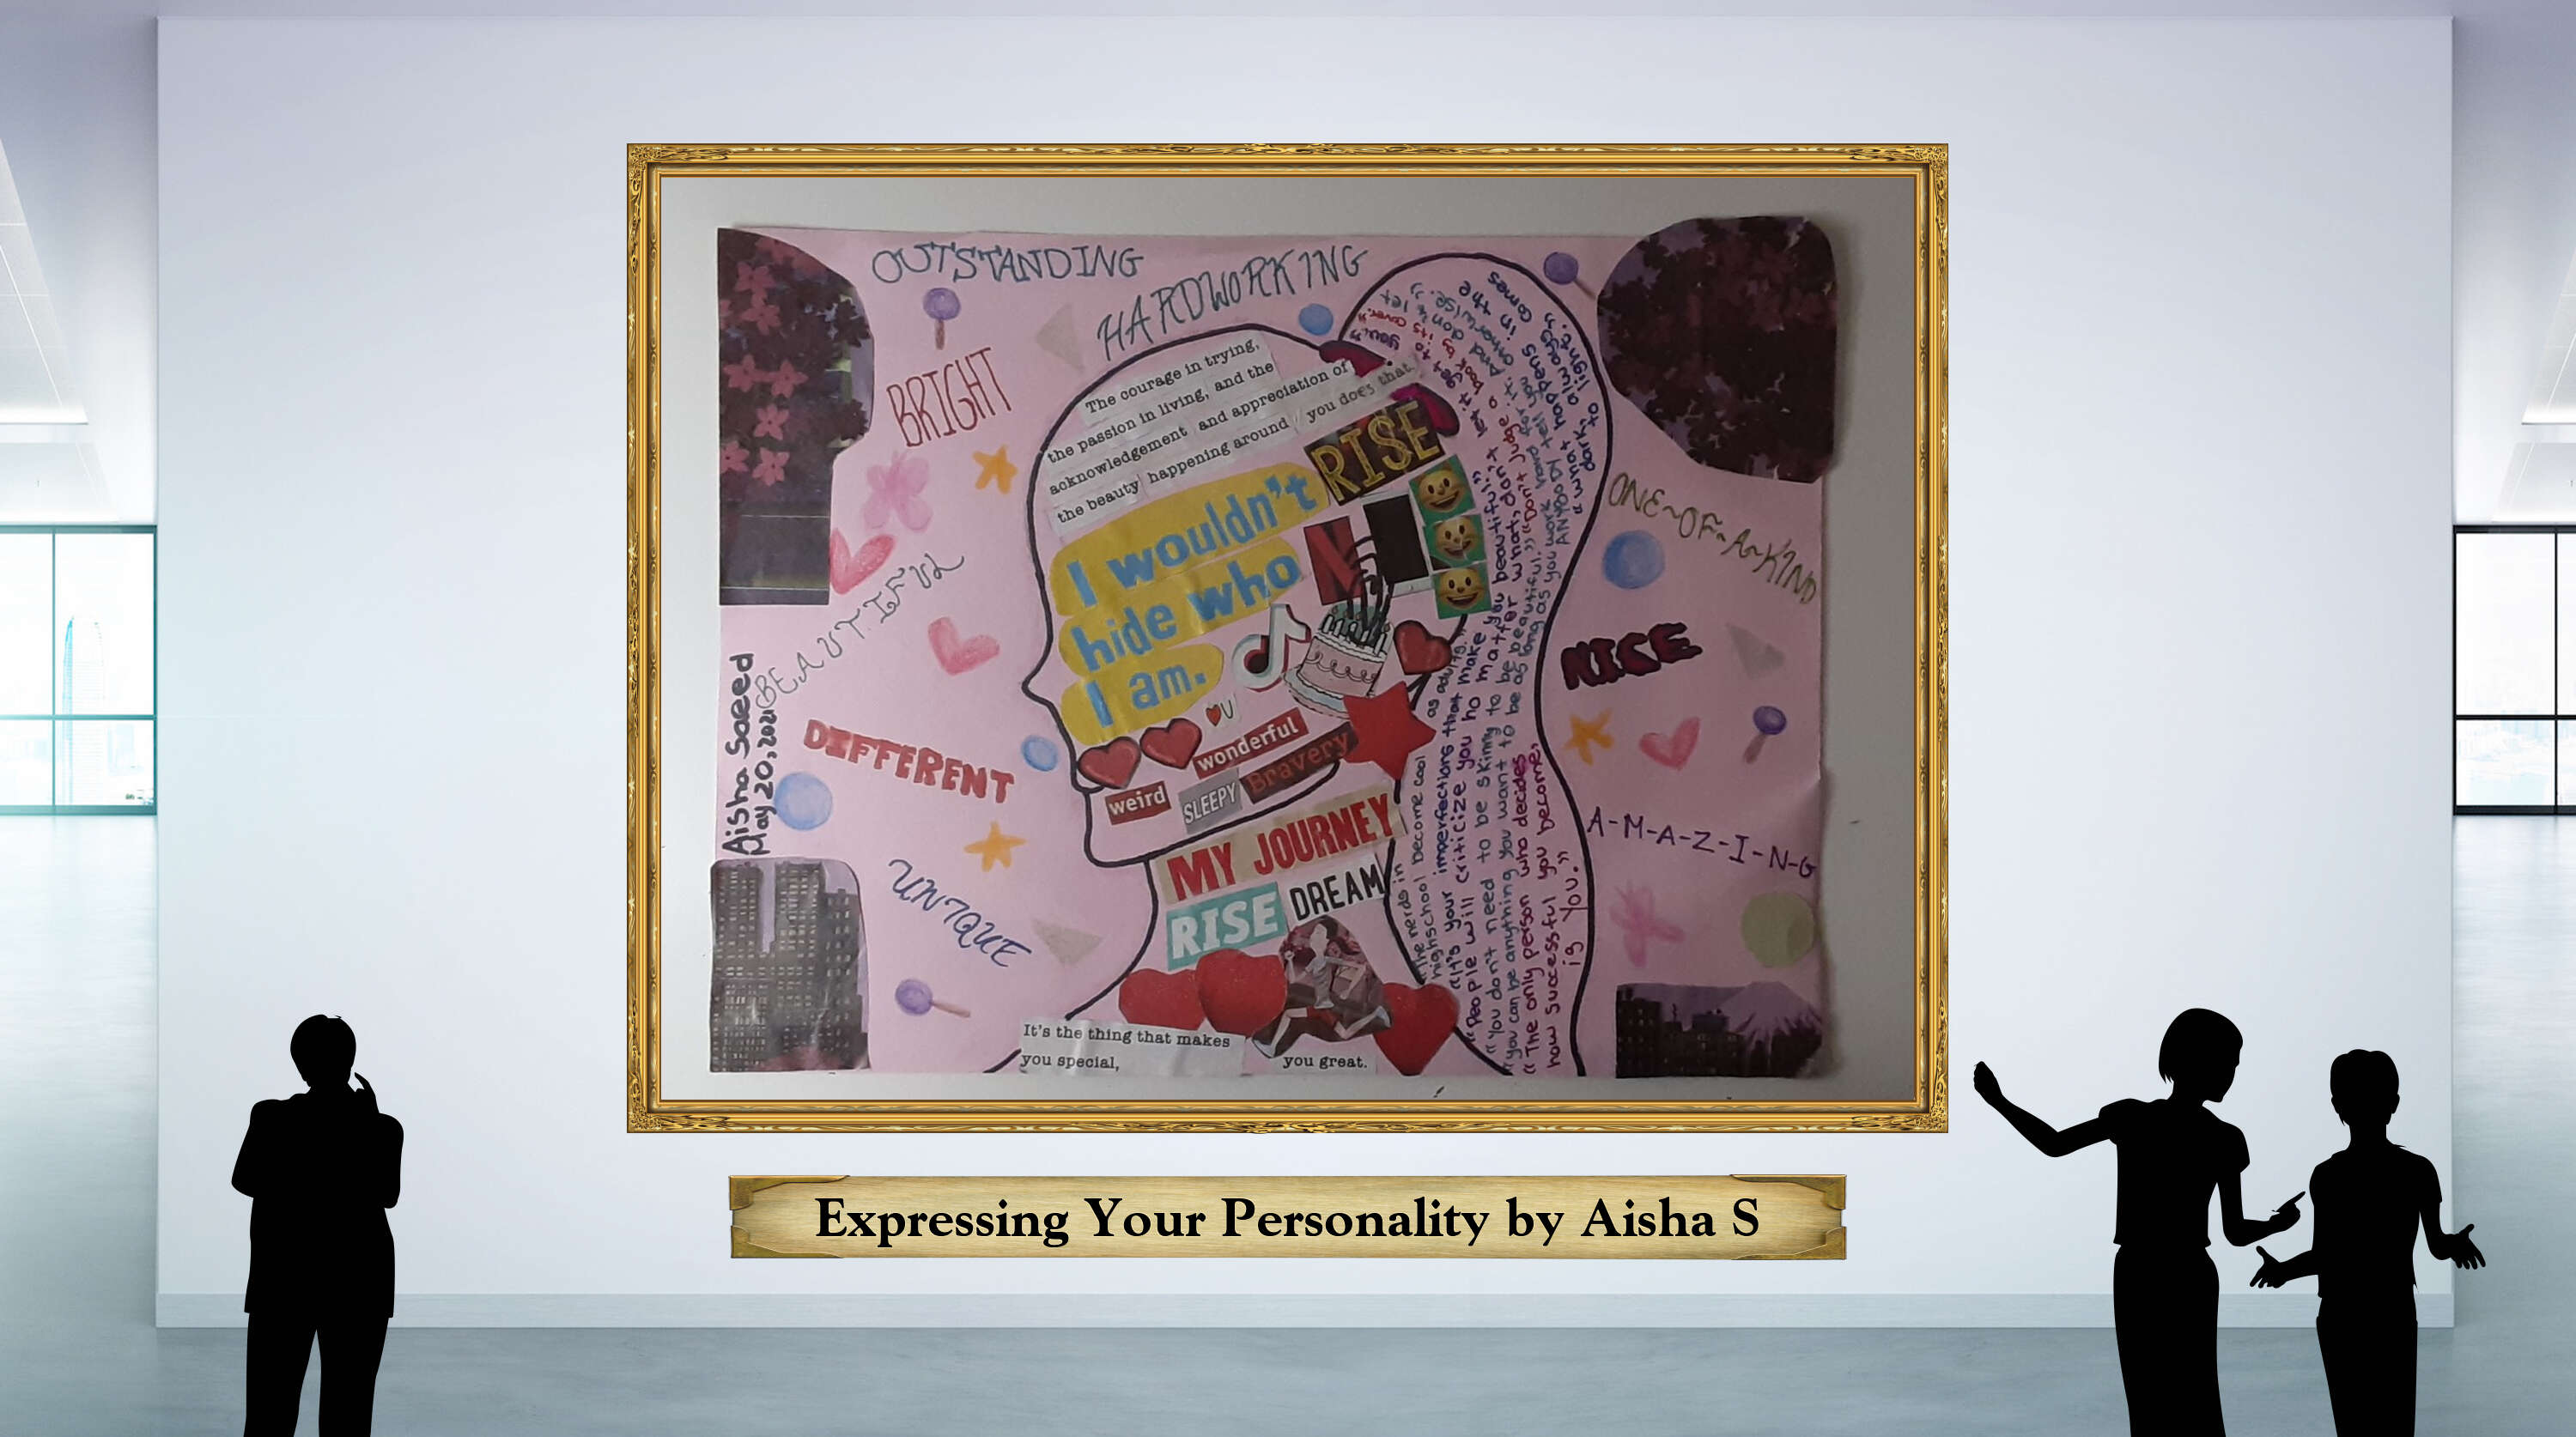 Expressing Your Personality by Aisha S